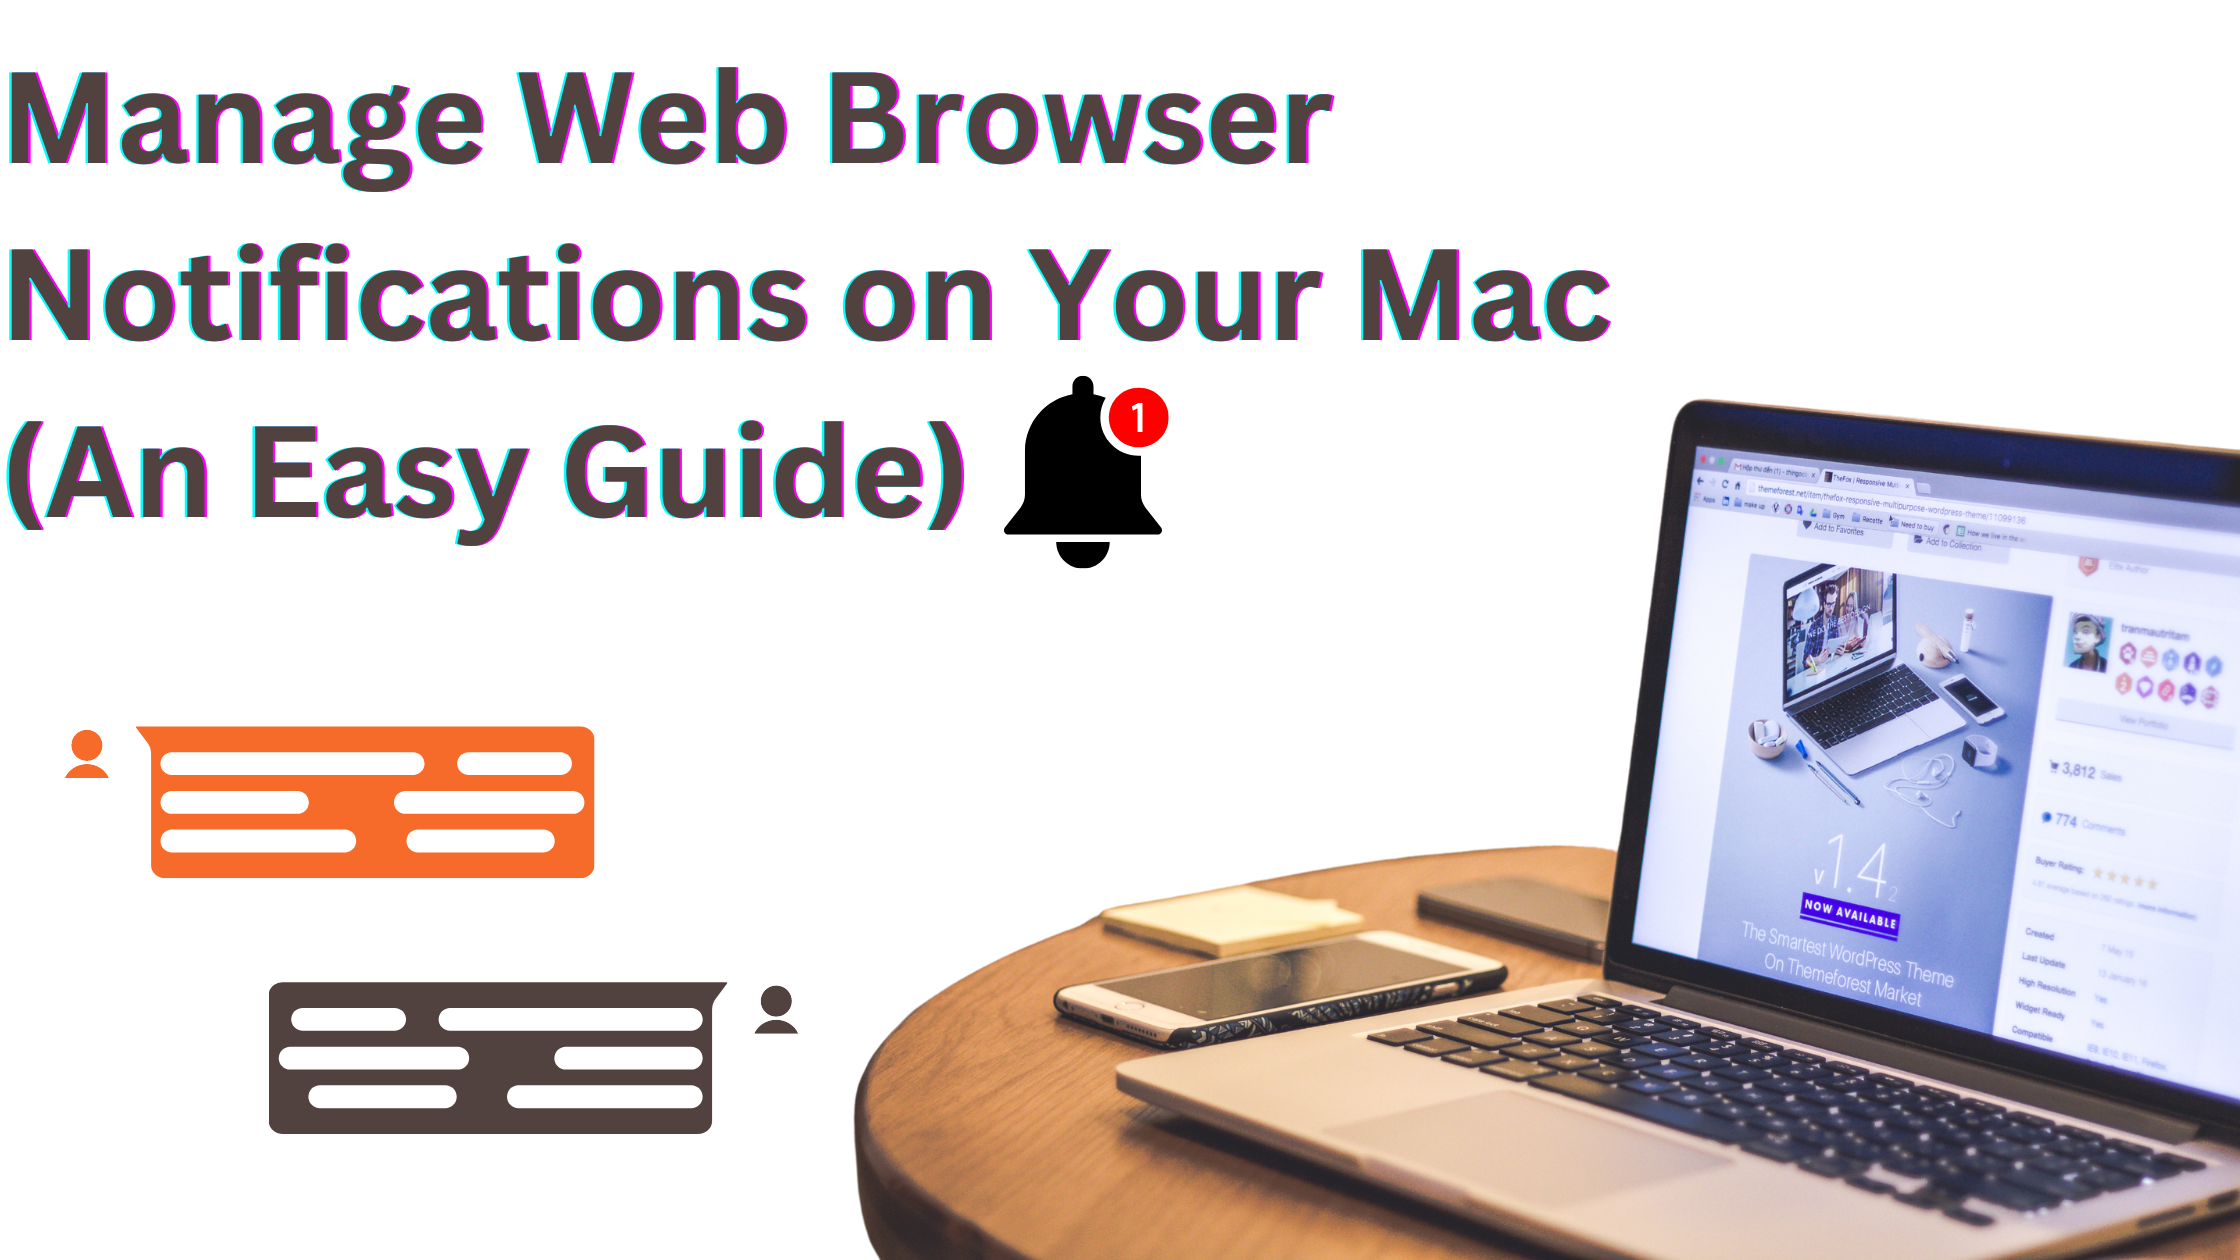 Manage Web Browser Notifications on Your Mac (An Easy Guide)